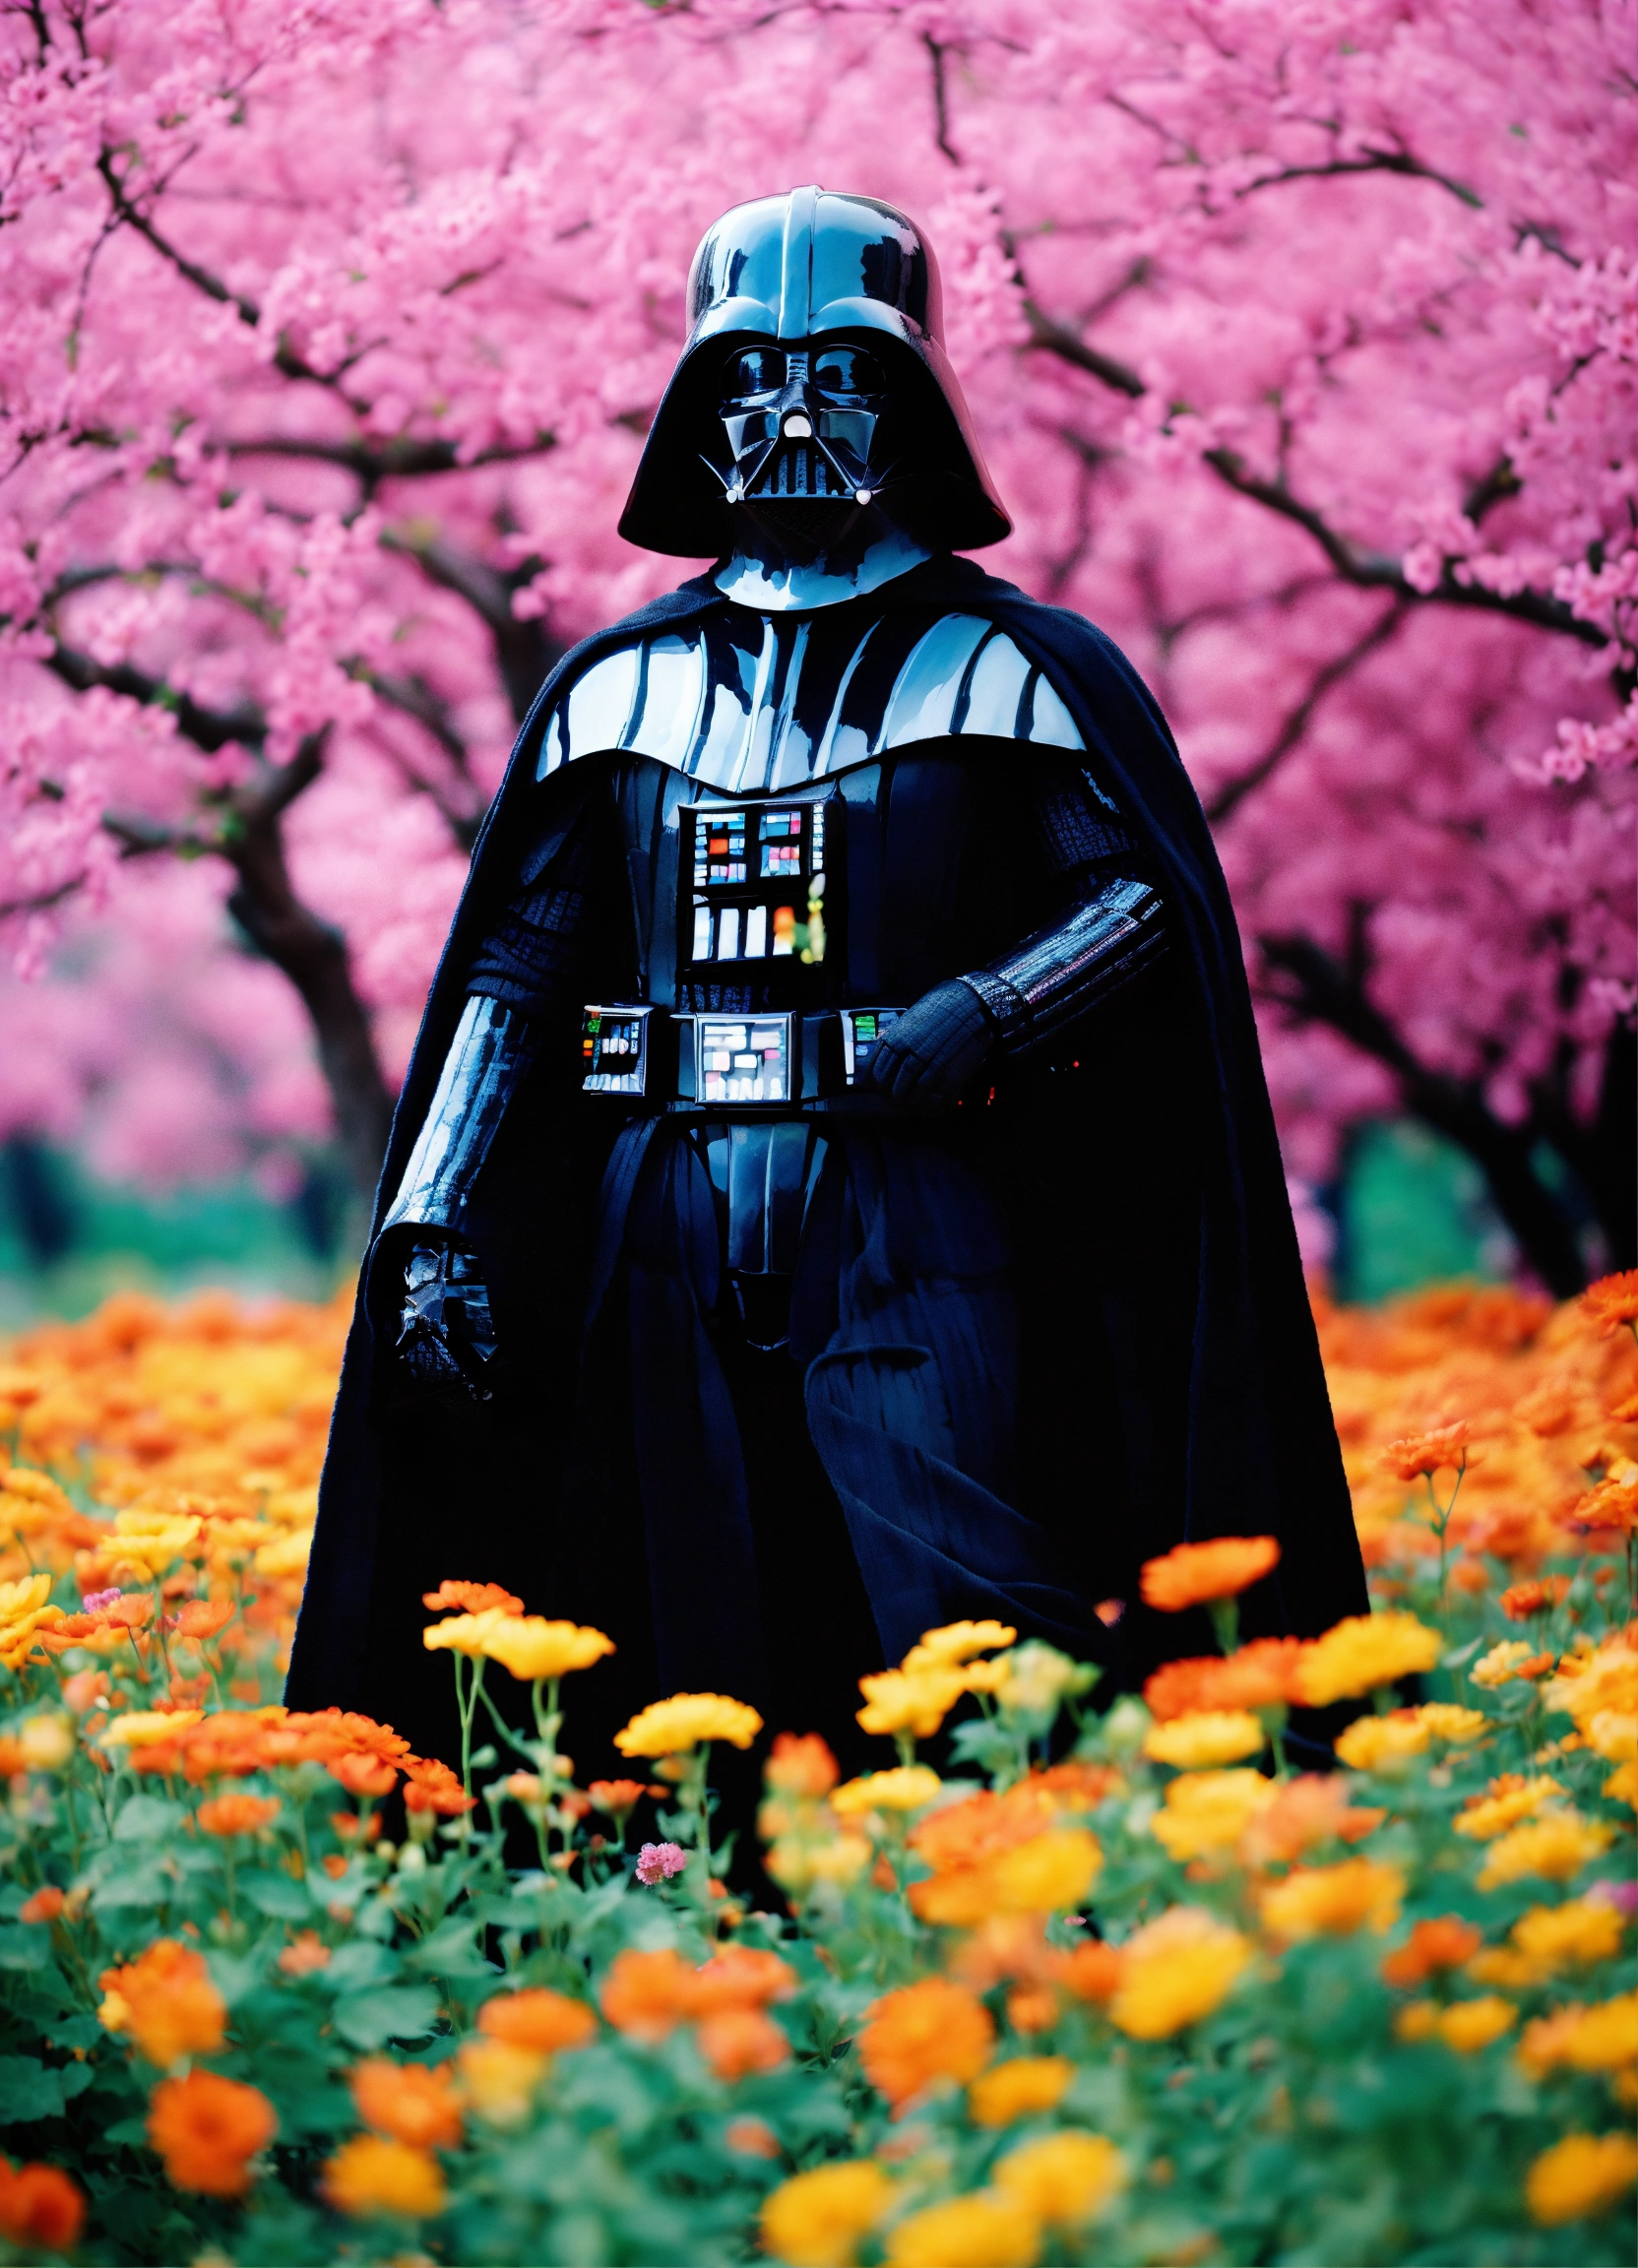 Lexica - Darth Vader in a beautiful field of flowers, colorful